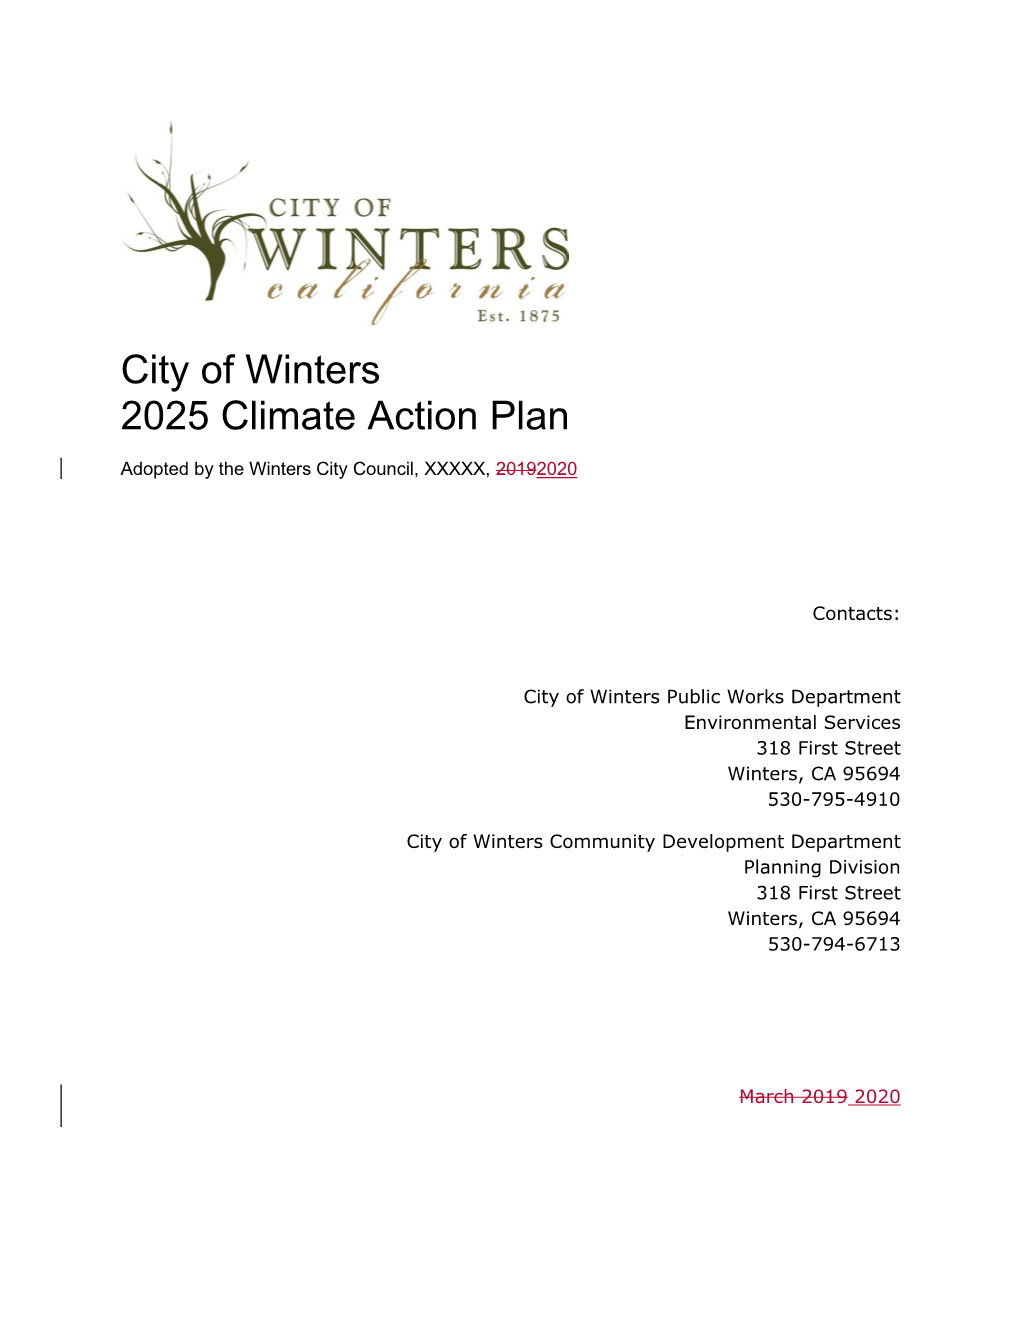 City of Winters 2025 Climate Action Plan